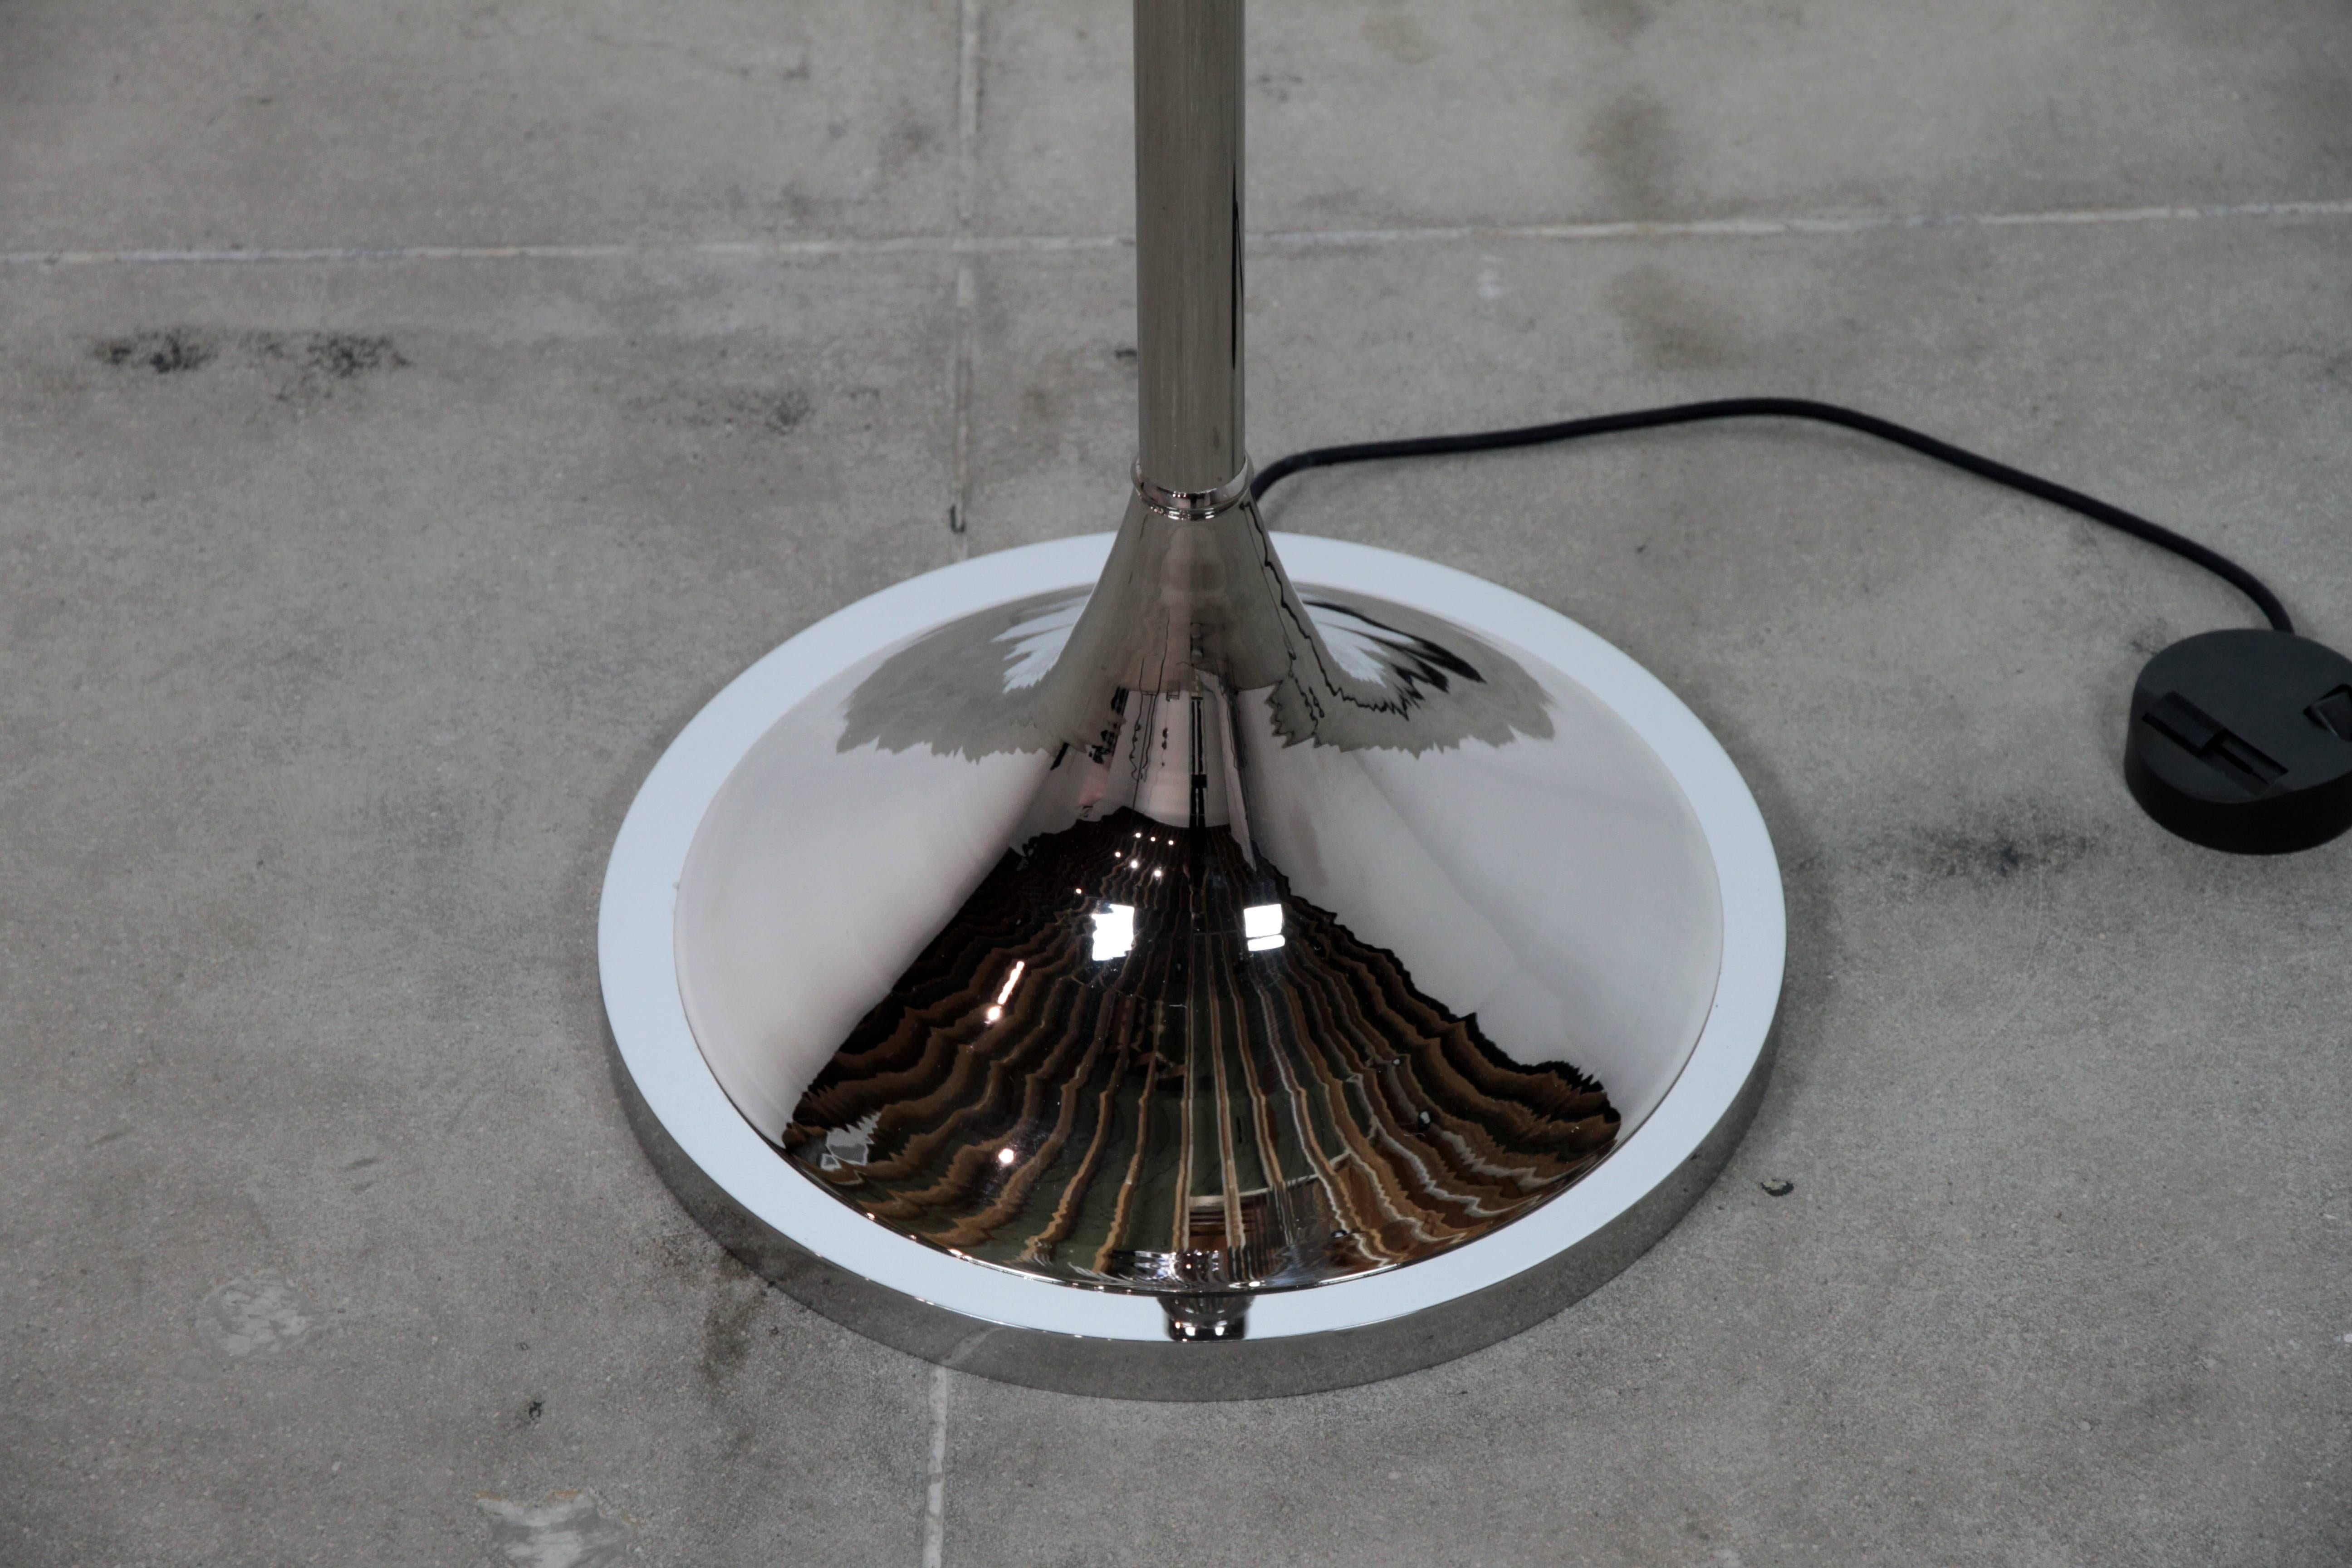 Plated California King Palm Tree Floor Lamp in stainless steel by Christopher Kreiling